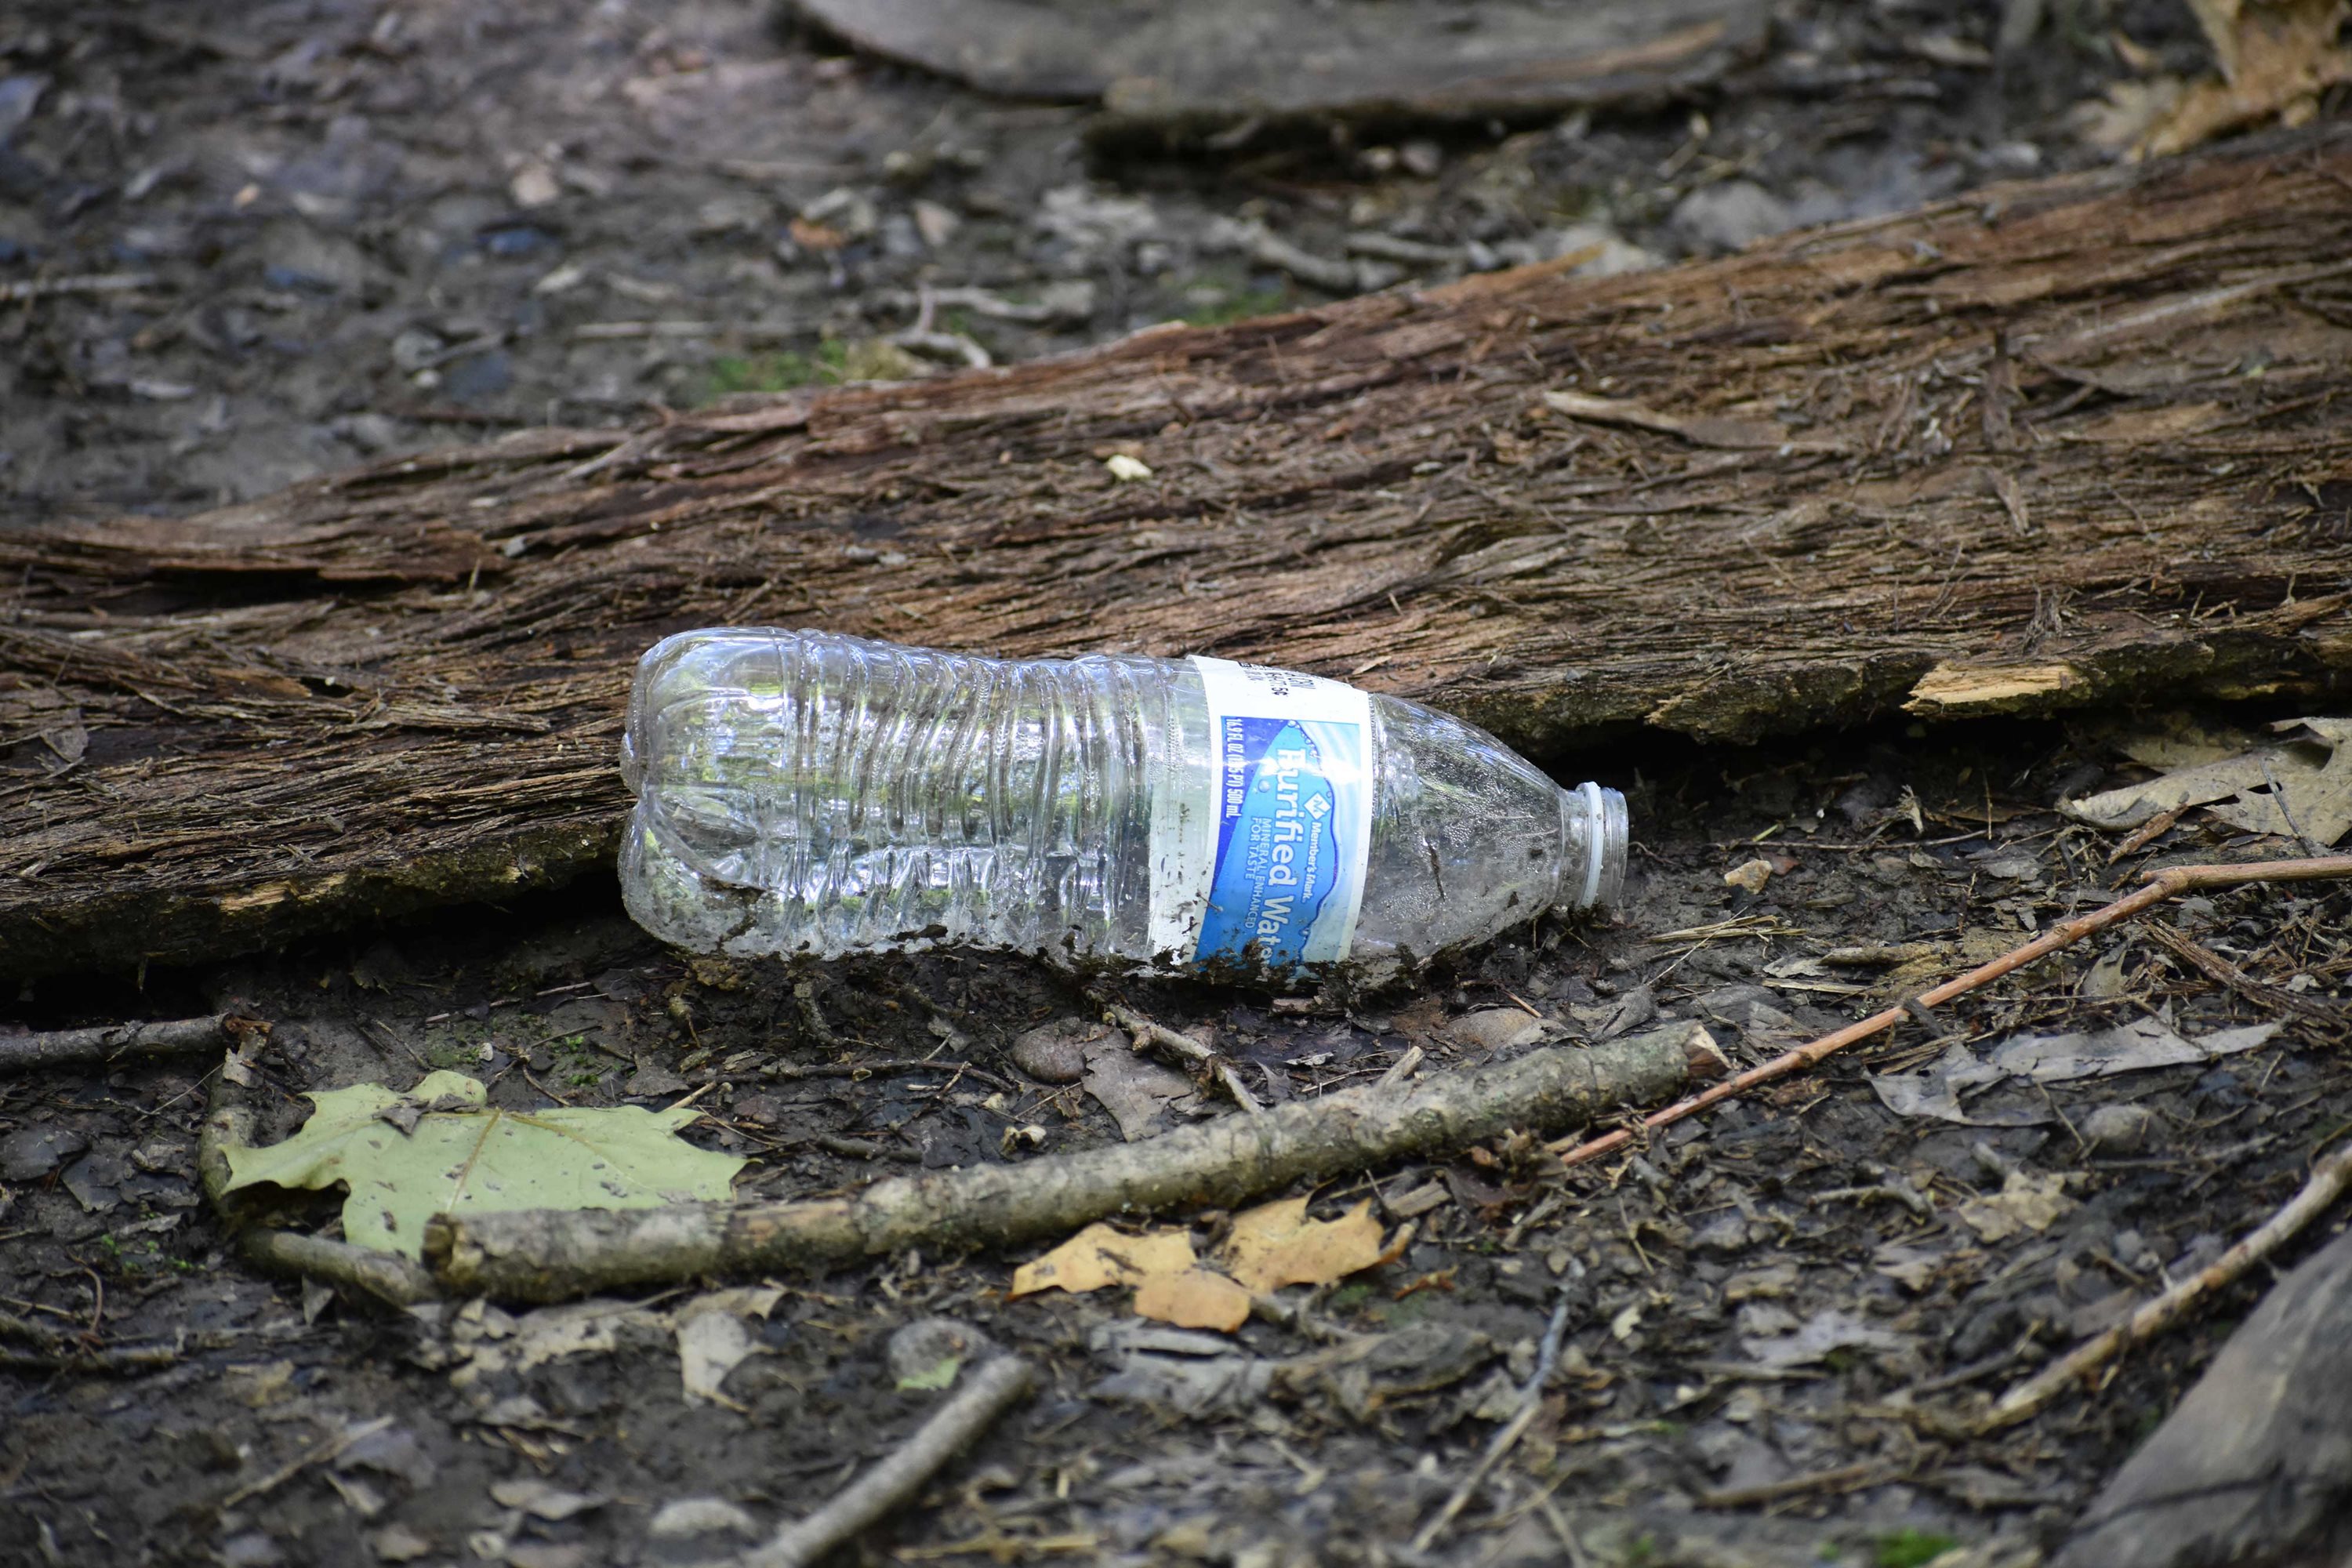 A plastic bottle on the ground.